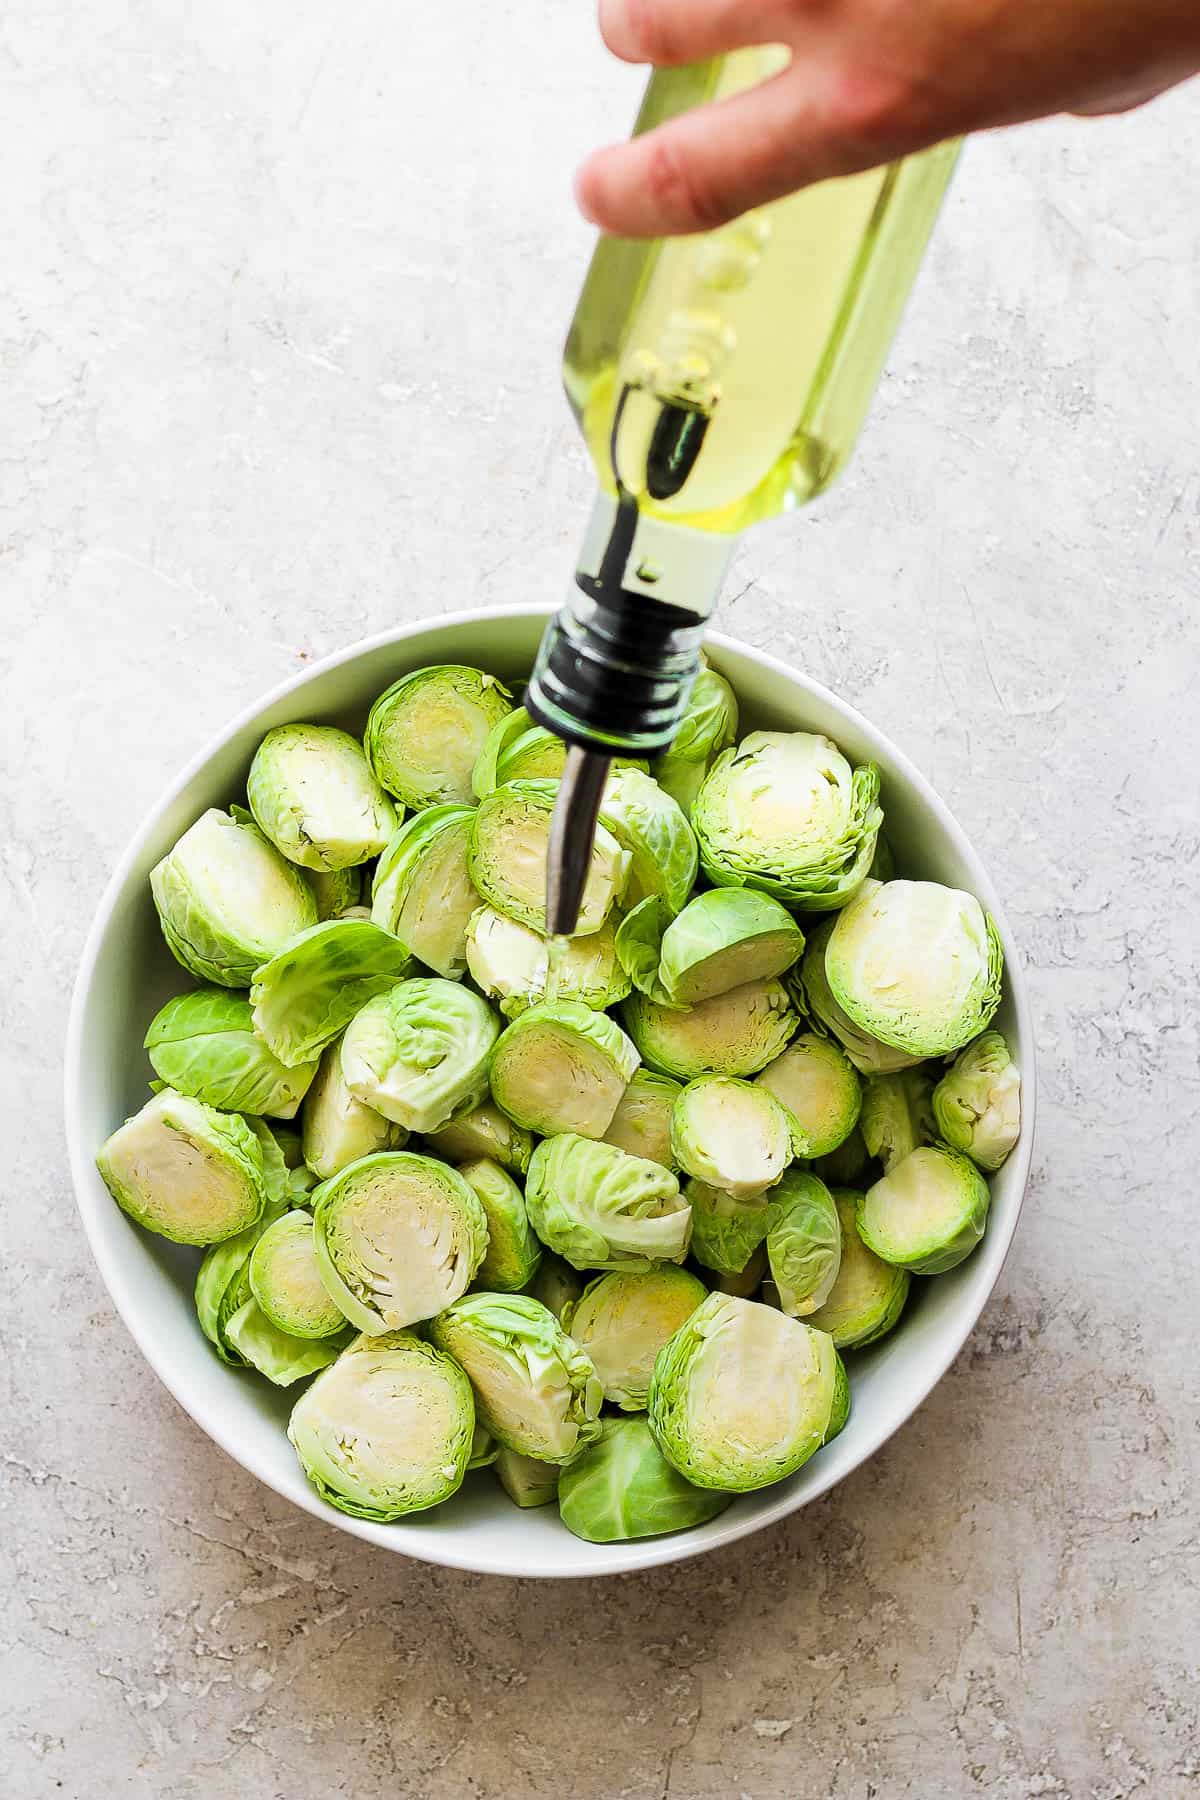 A bowl of trimmed and halved brusssel sprouts being drizzled with olive oil.